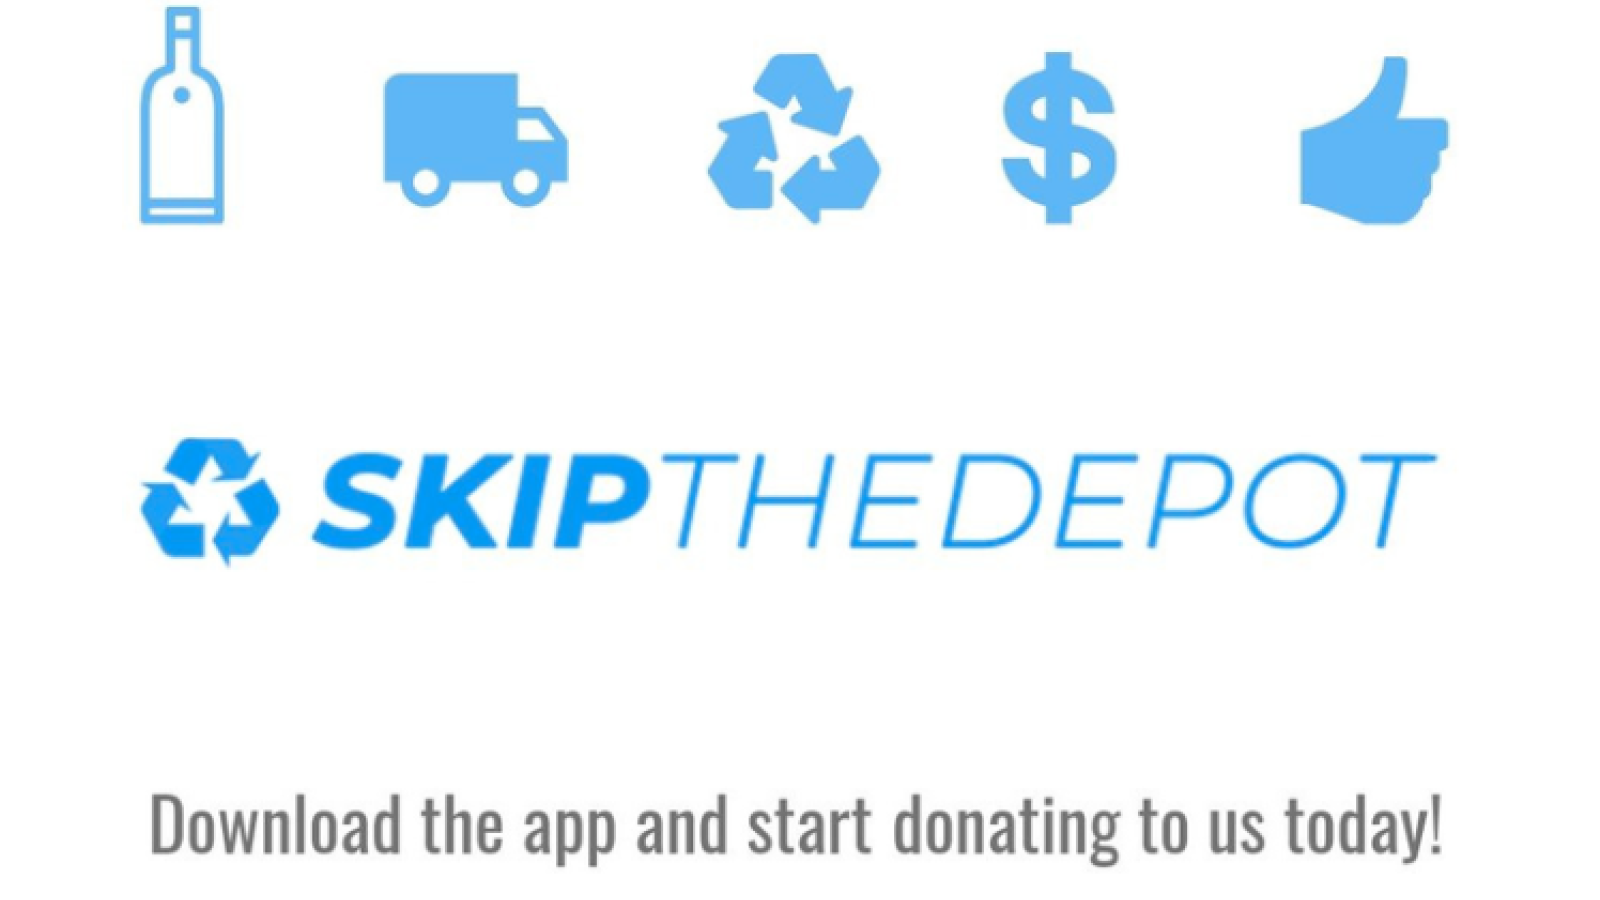 Graphic with recyclable bottles; text says "SkipTheDepot: Download the app and start donating to us today!"